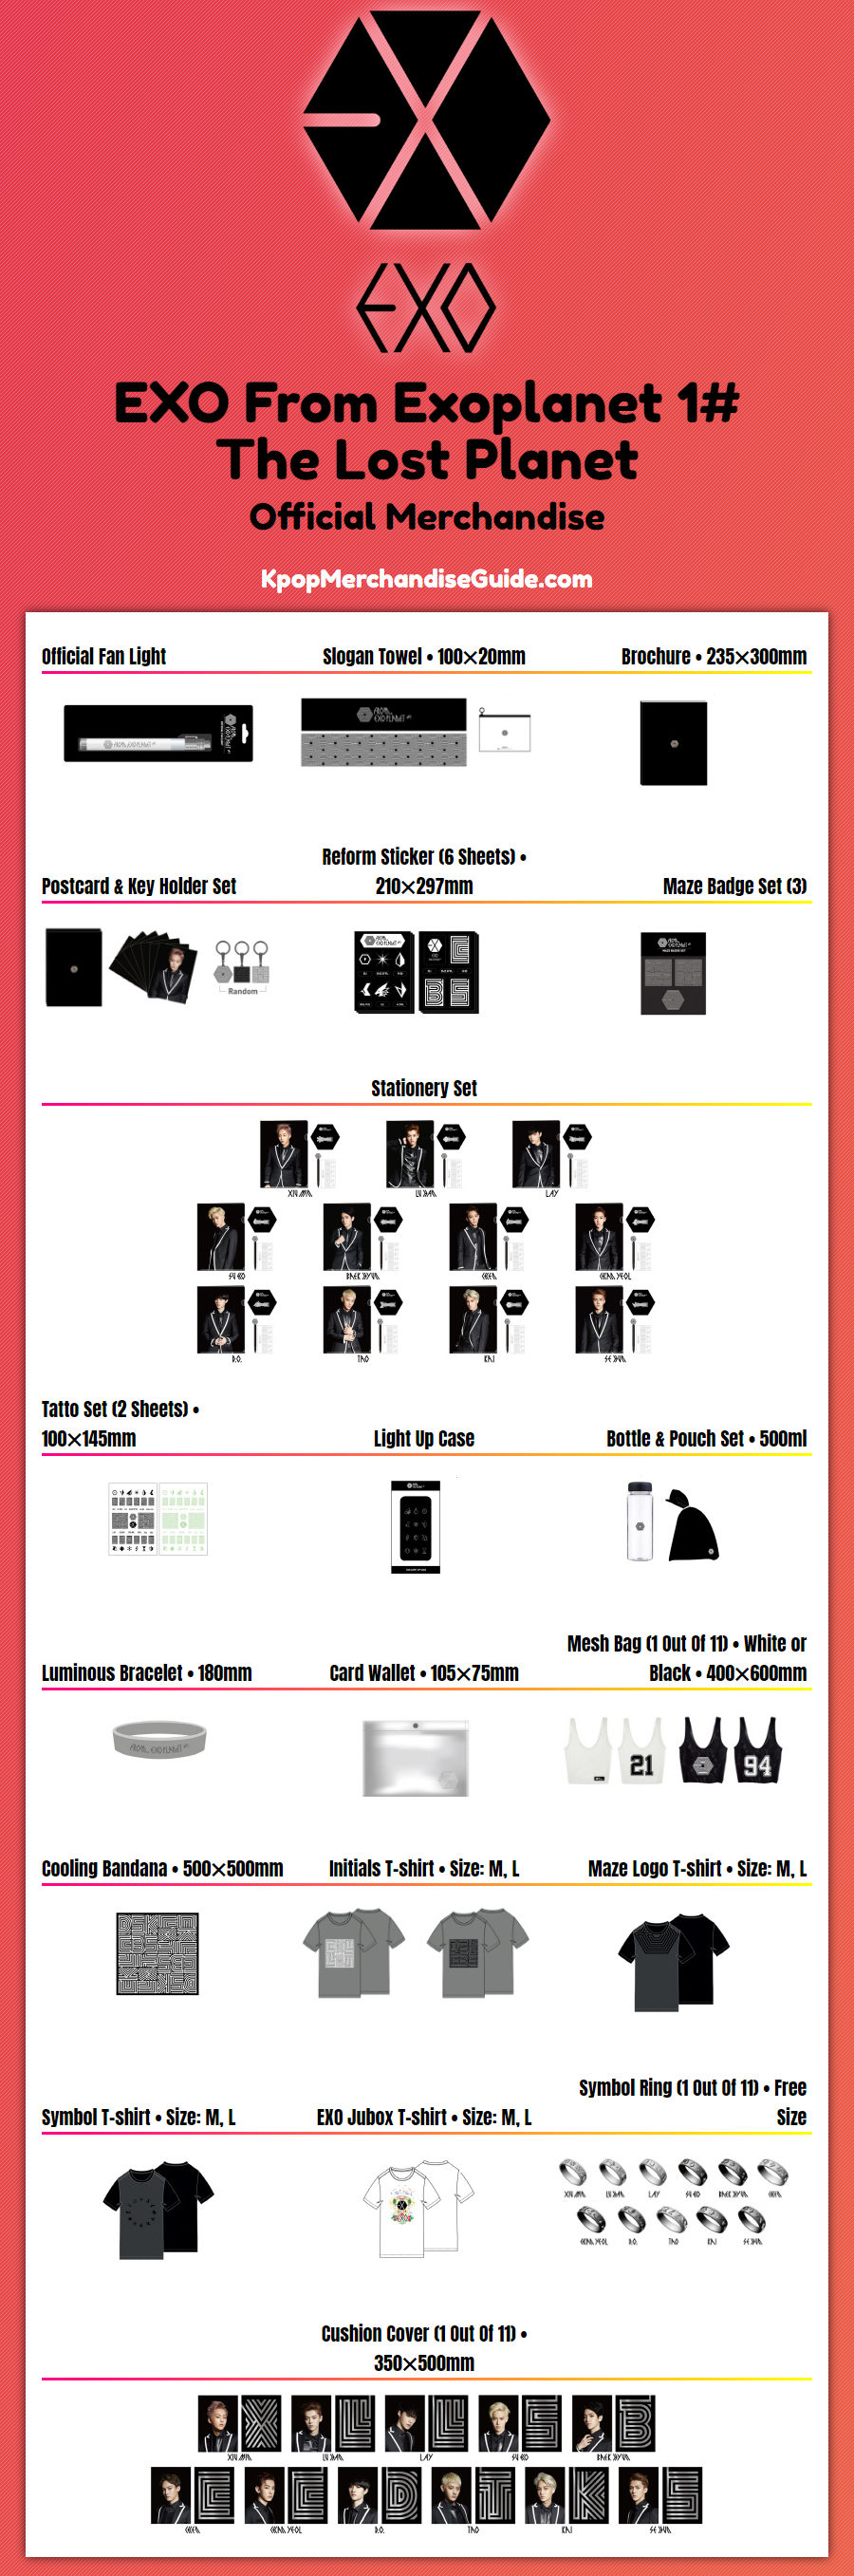 EXO From Exoplanet #1 - The Lost Planet Merchandise